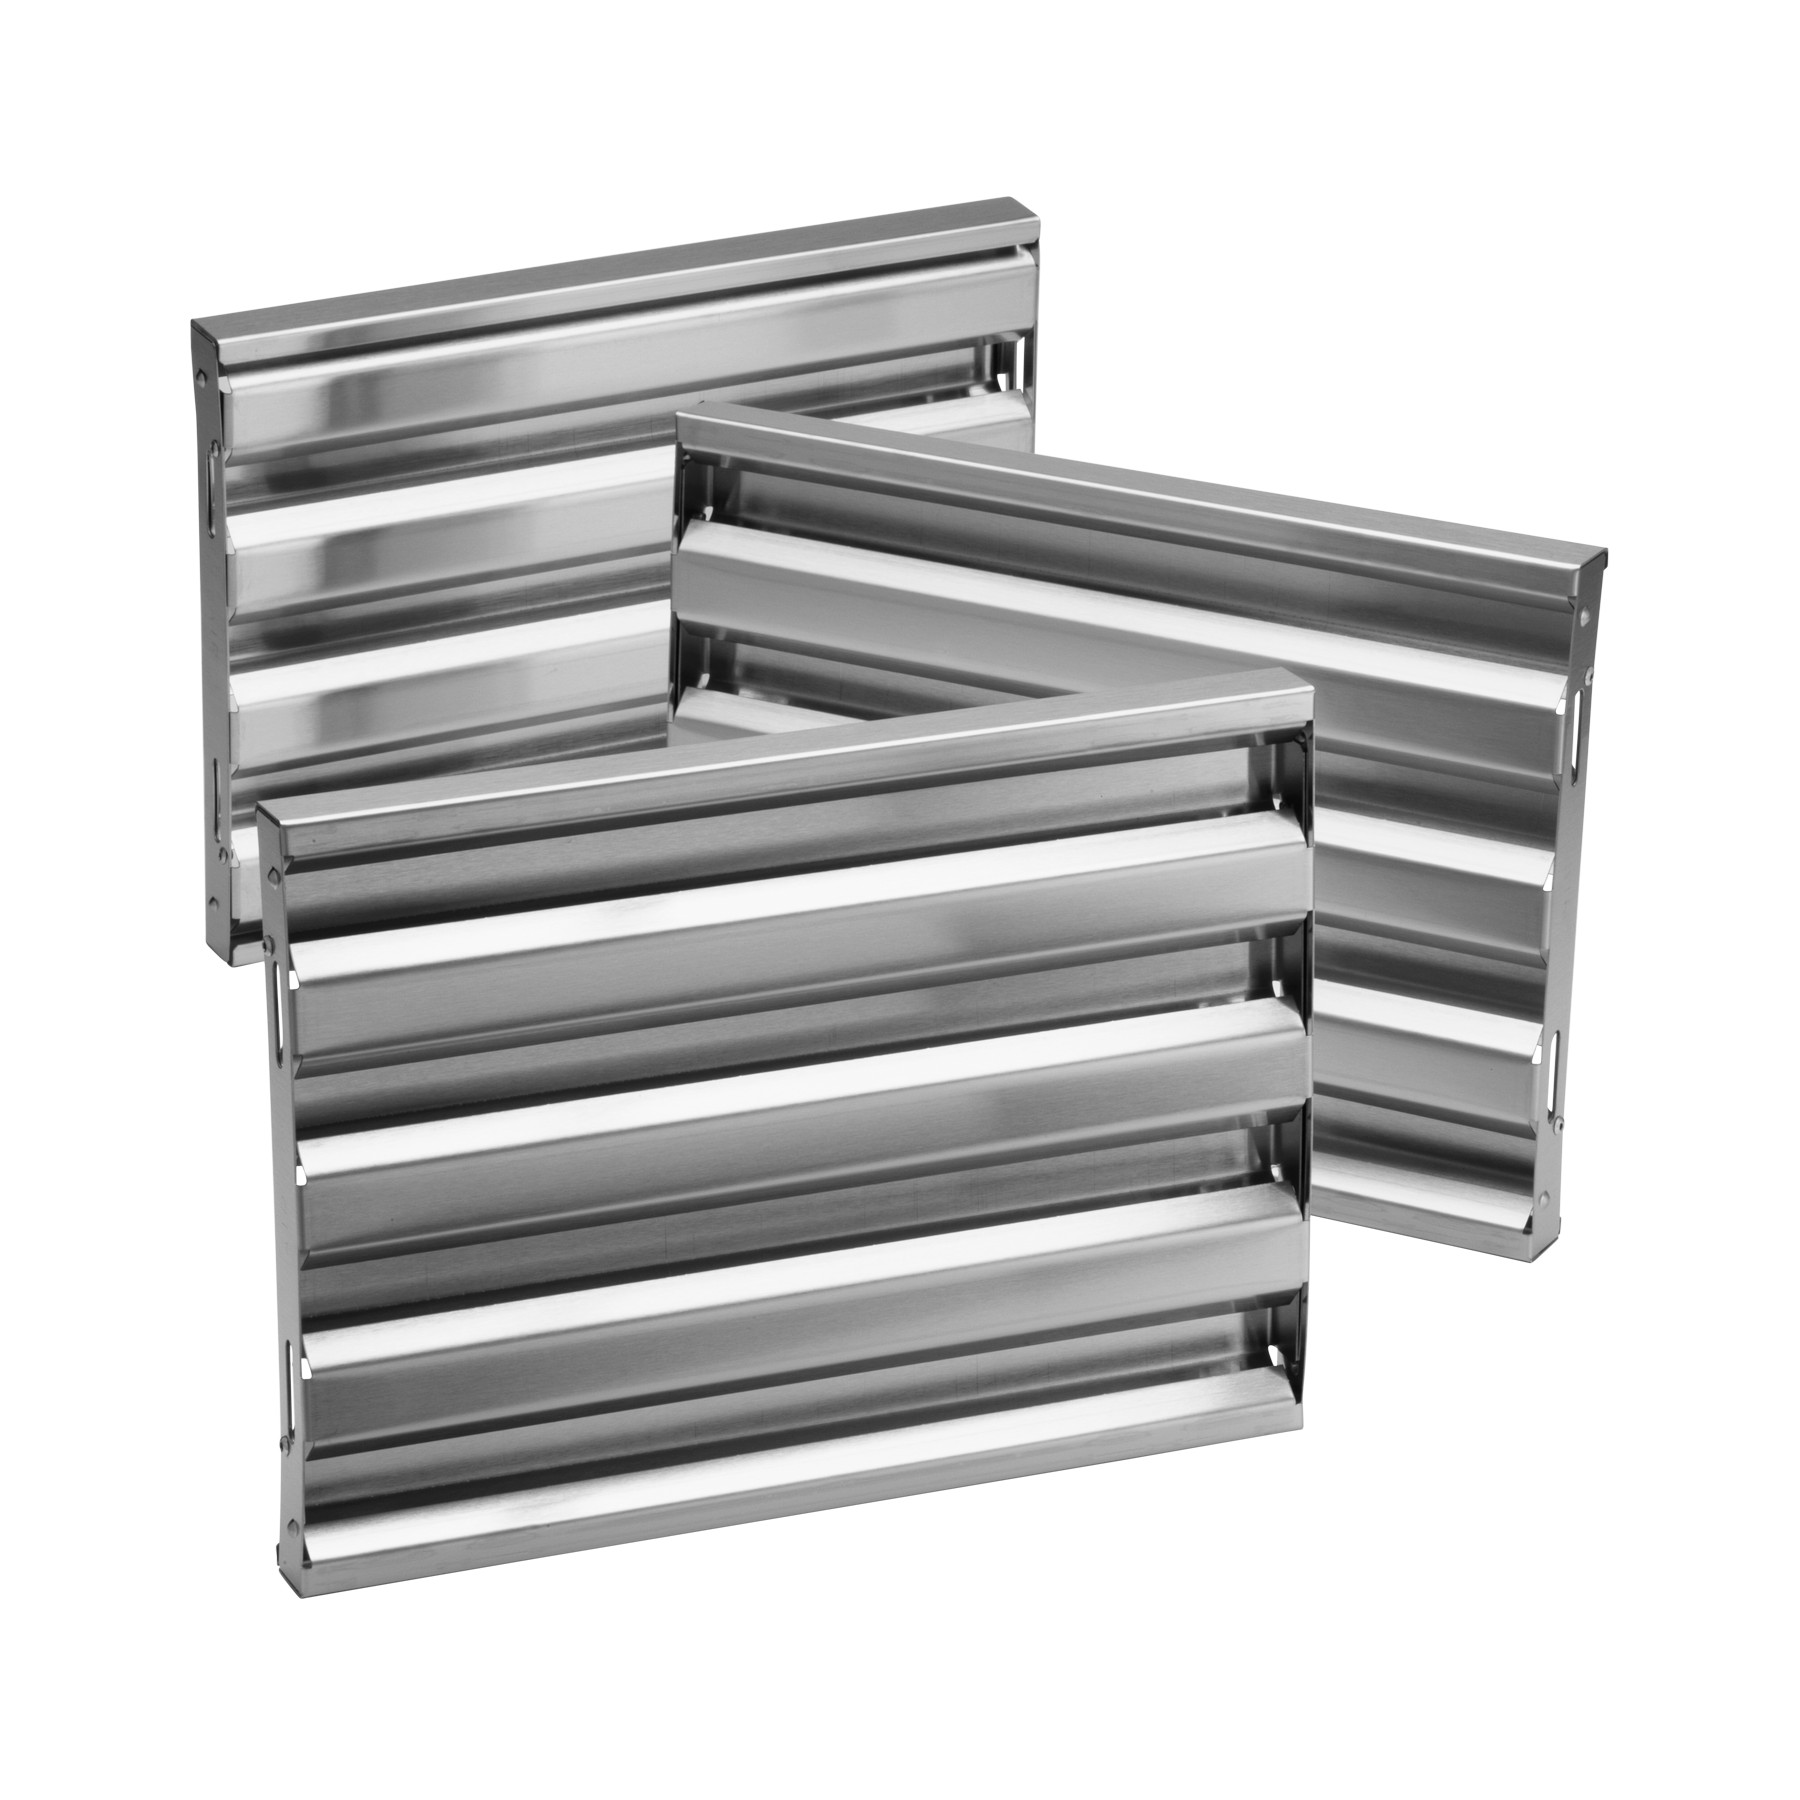 Optional Baffle Filter Kit for 45-Inch Pro-Style Insert, in Stainless Steel